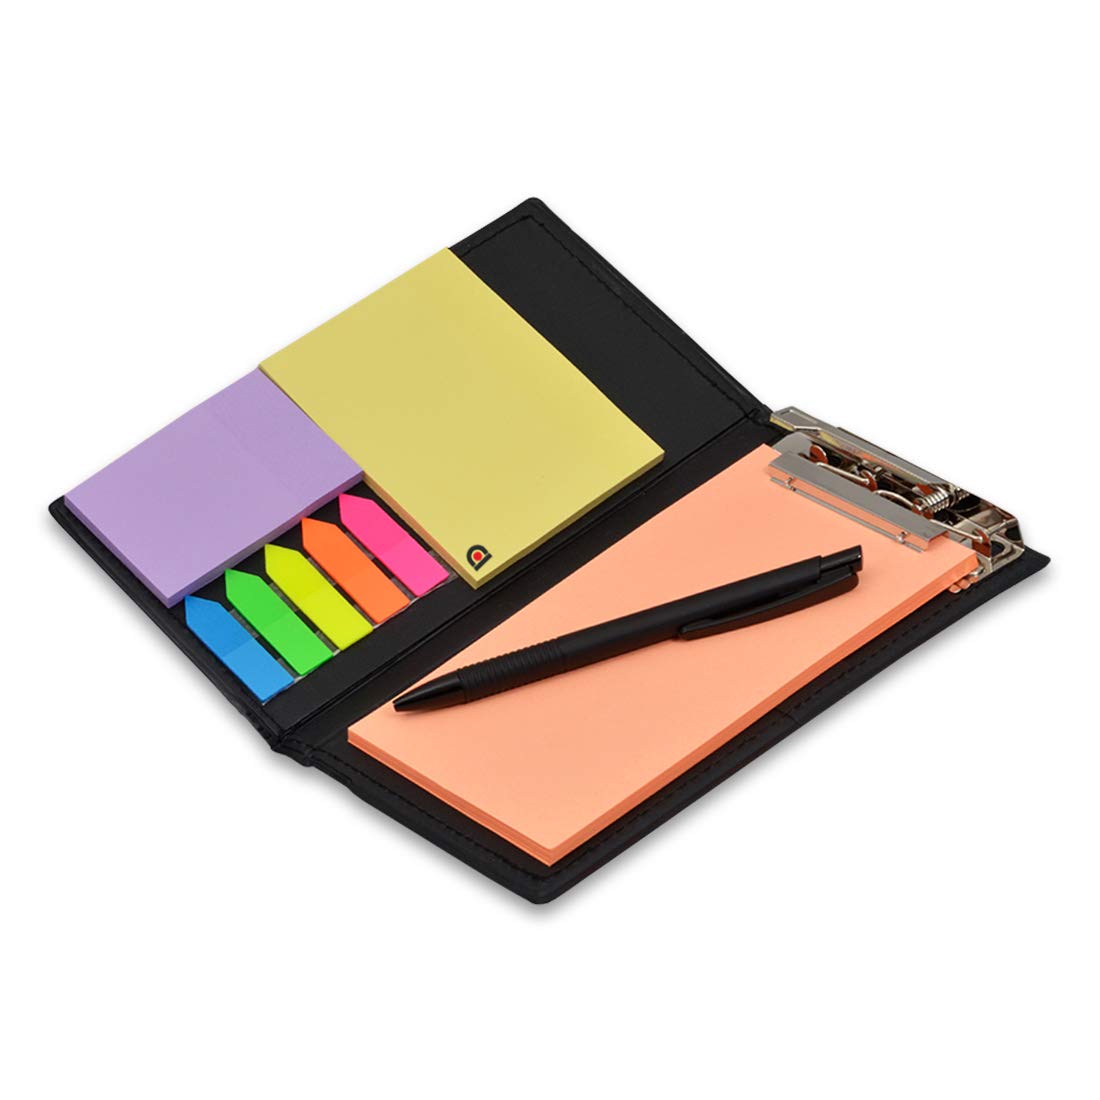 Buy Notepad Memo Holder Desk Organizer with Colorful Sticky Notes Gift Set with Pen